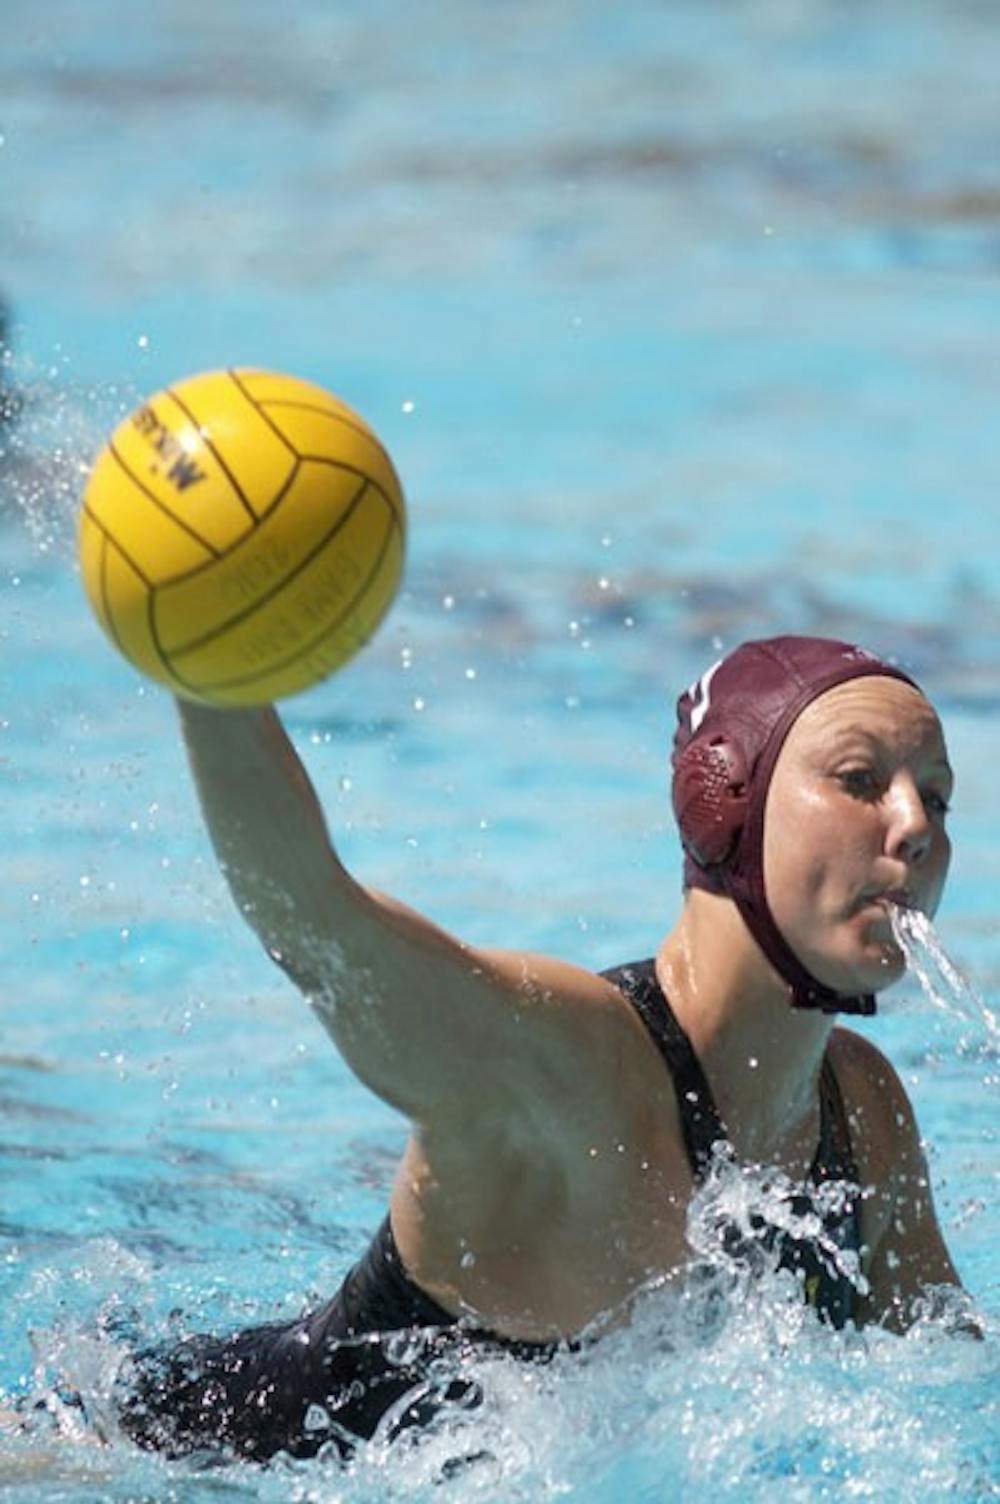 LAST HOORAH: ASU freshman center Shannon Haas gets ready to pass during the Sun Devils' 14-5 loss to USC last weekend at the Mona Plummer Aquatic Center. ASU will face San Diego State and Indiana in its final regular-season home games this weekend. (Photo by Scott Stuk)